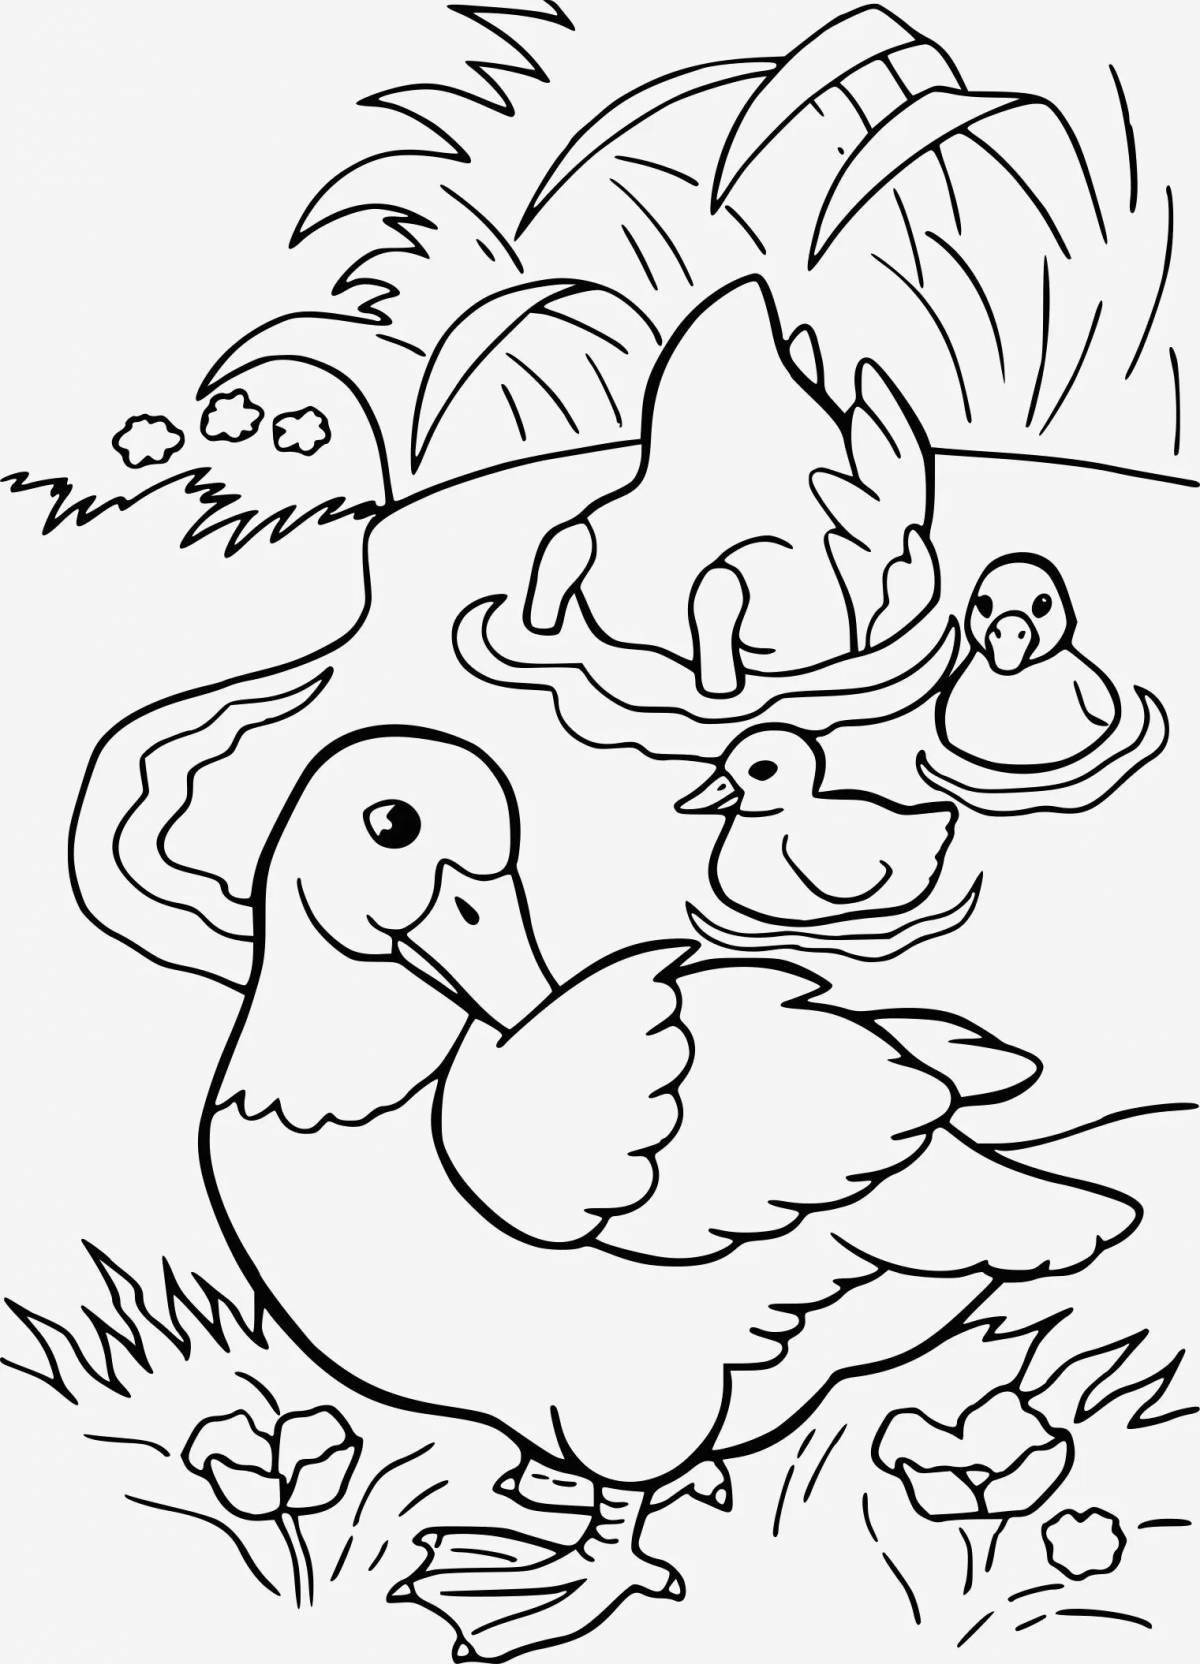 Fancy poultry coloring page